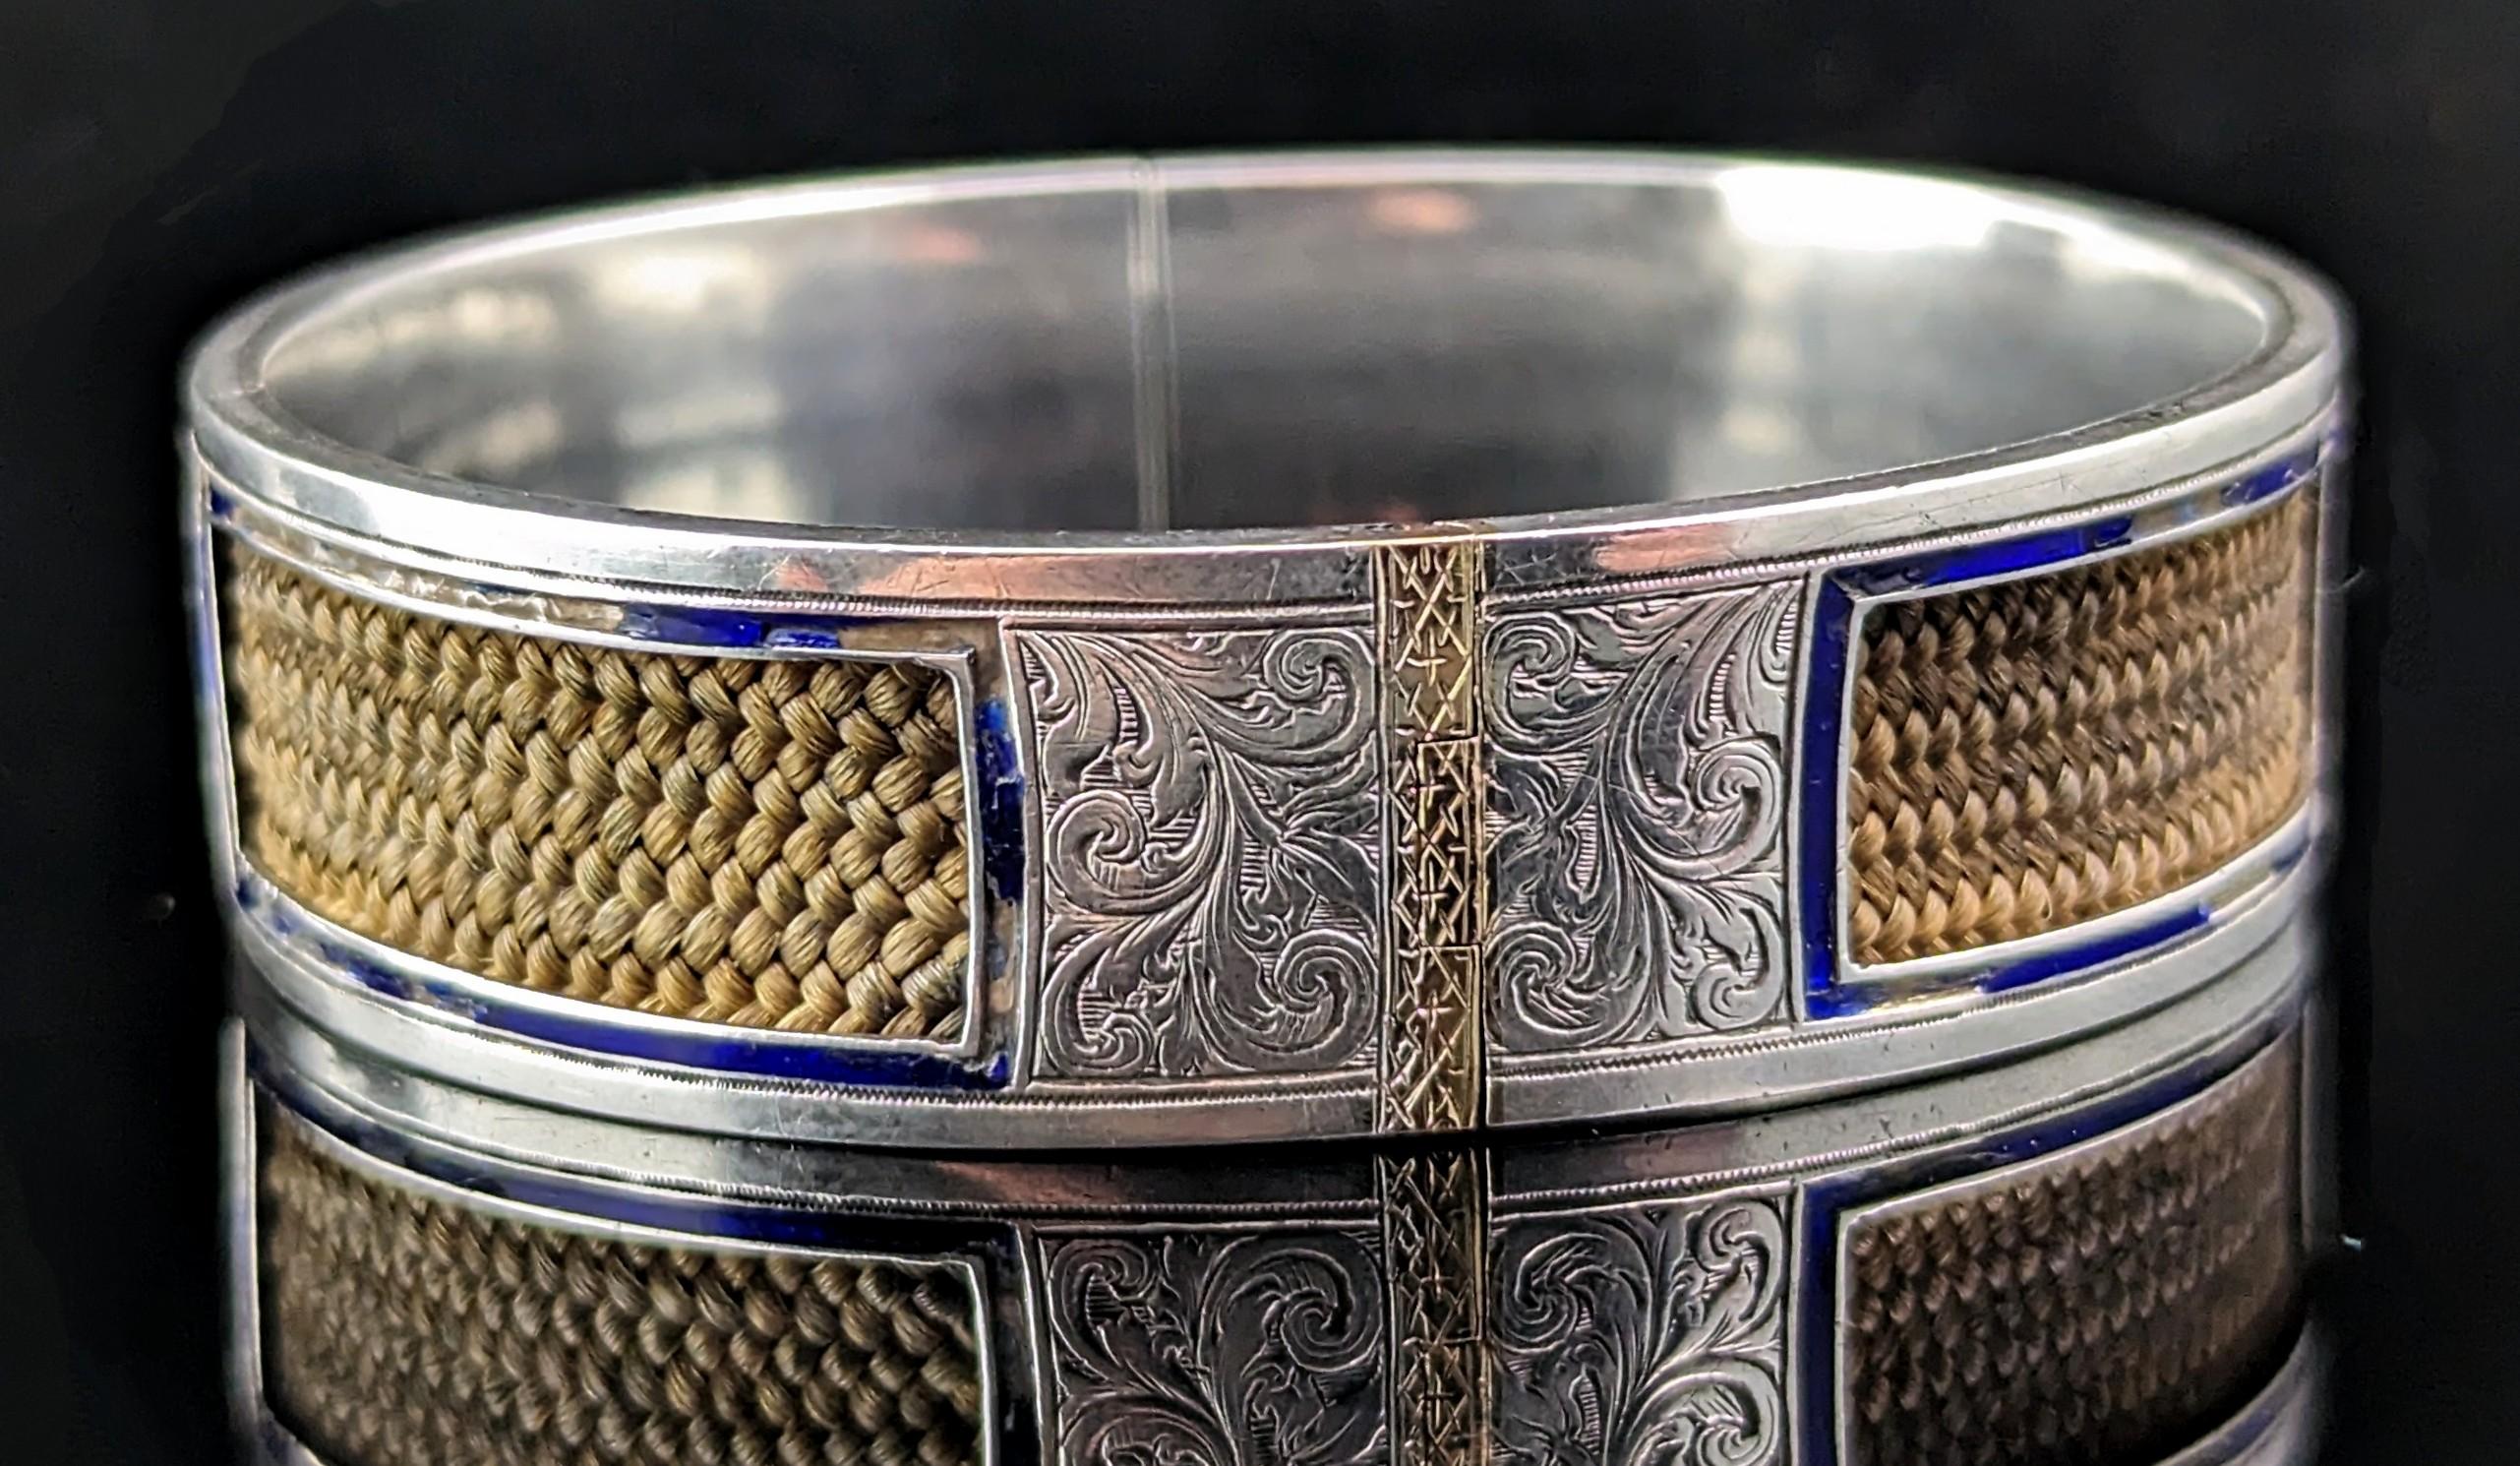 This unusual antique mourning bangle is so sweet and sentimental.

It is an interesting and unusual design, the bangle designed in a typical aesthetic era manner in engraved sterling silver.

It has inlaid 9ct gold sections and finely plaited light